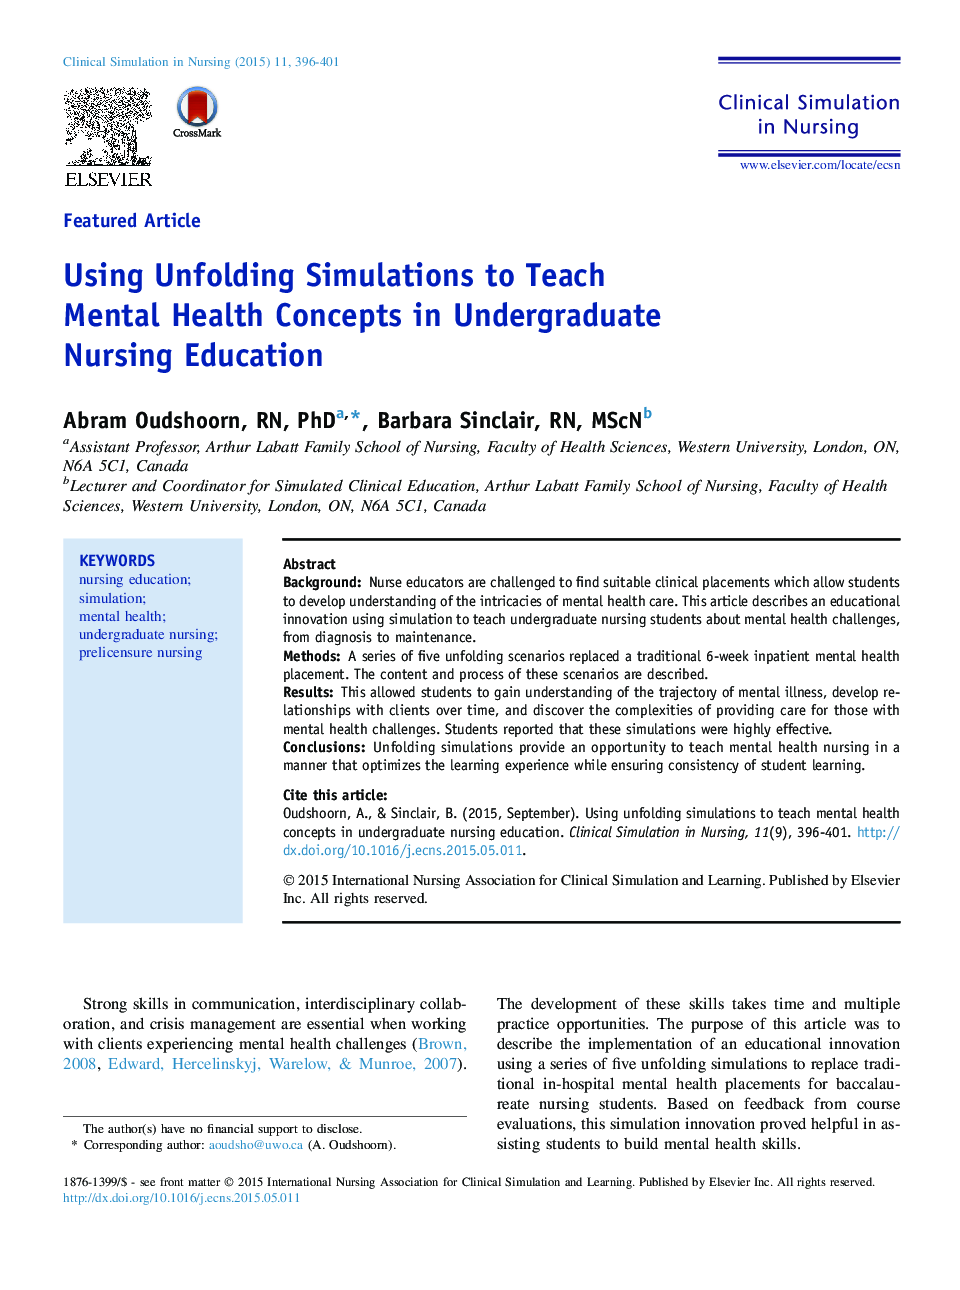 Using Unfolding Simulations to Teach Mental Health Concepts in Undergraduate Nursing Education 